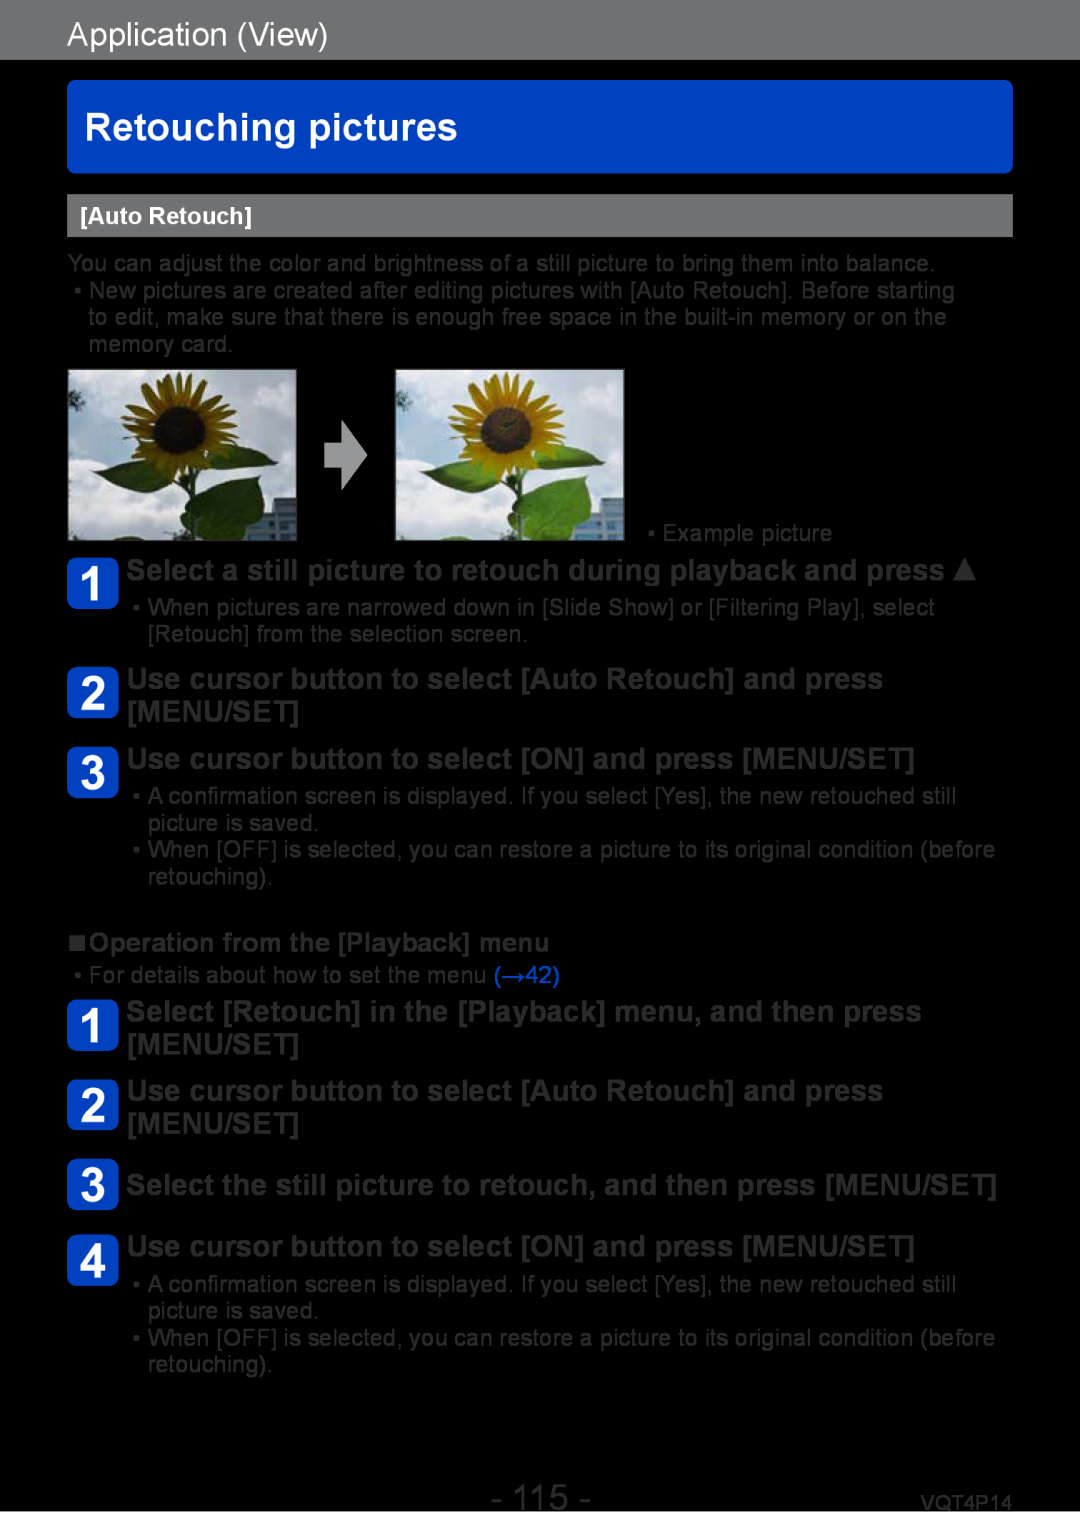 Panasonic DMCZS25K Retouching pictures, Select a still picture to retouch during playback and press, Application View 